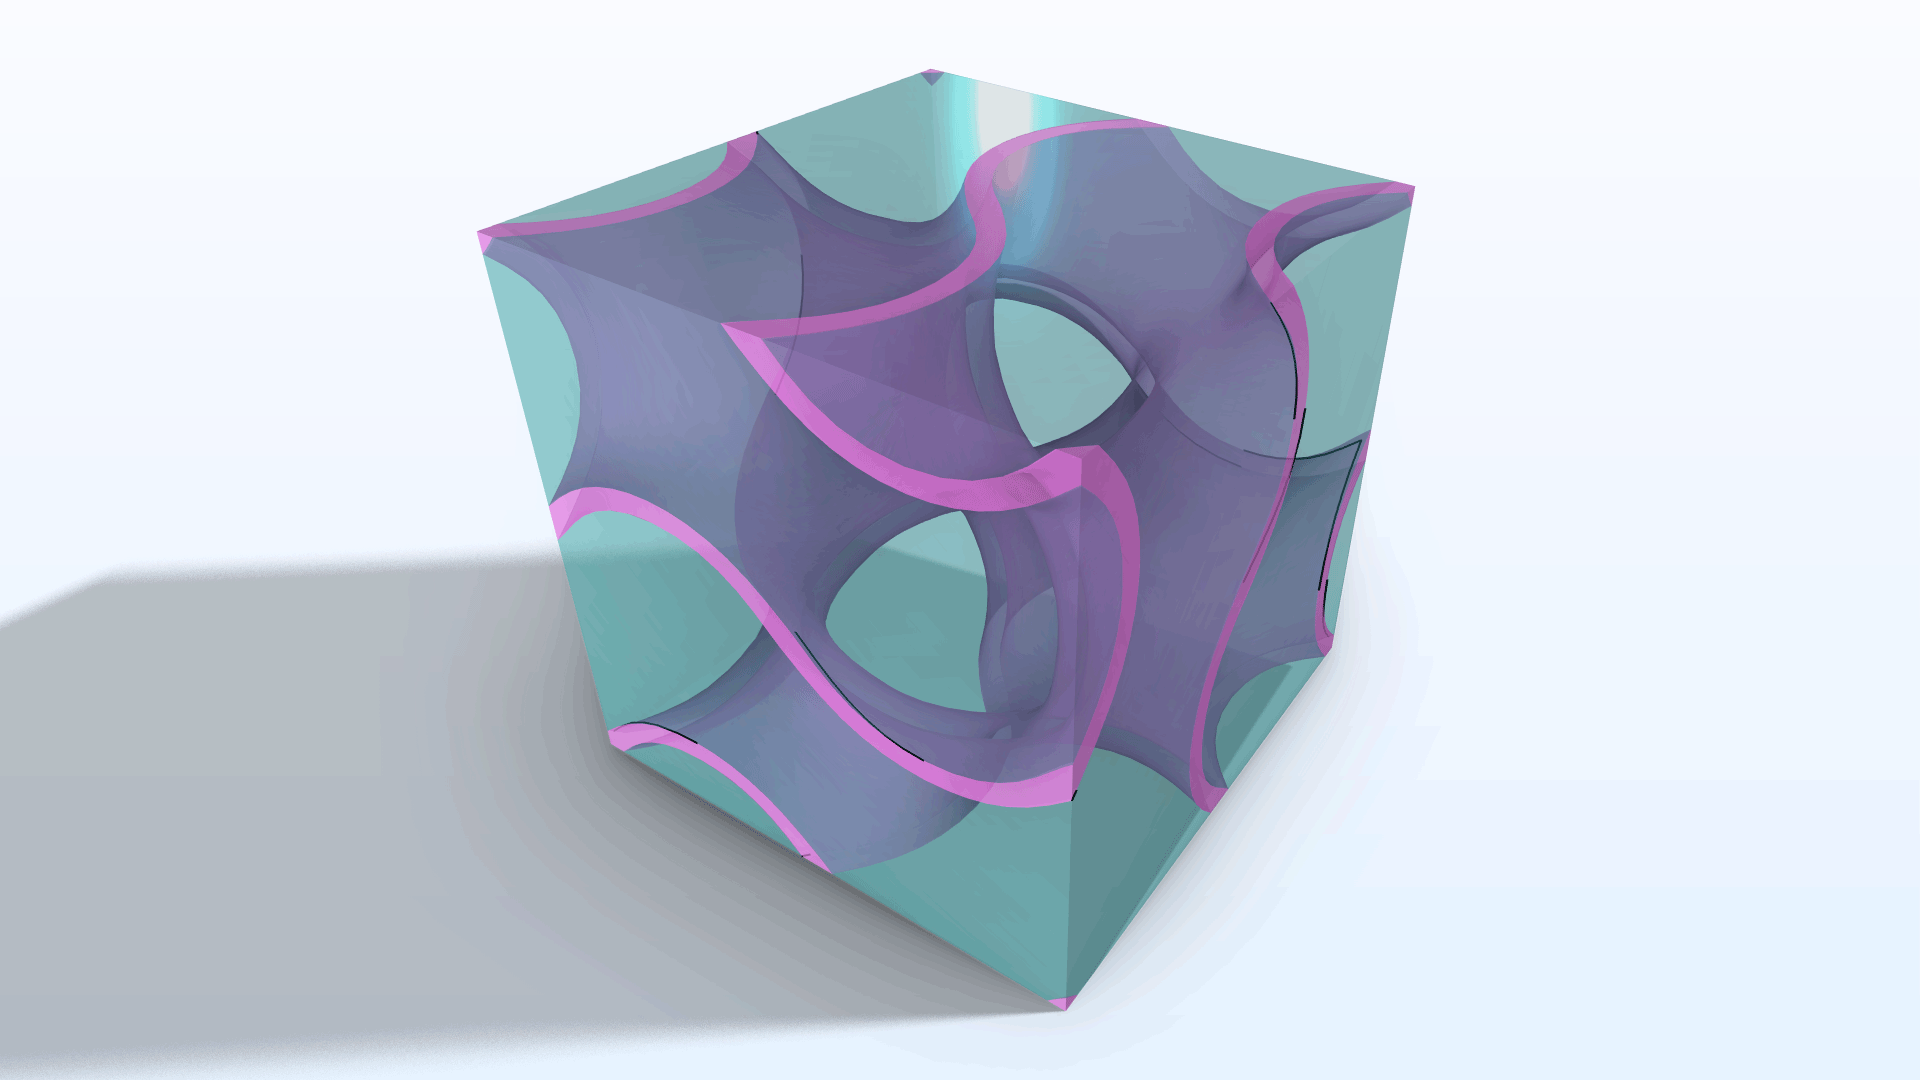 A gyroid unit cell model in teal and pink.